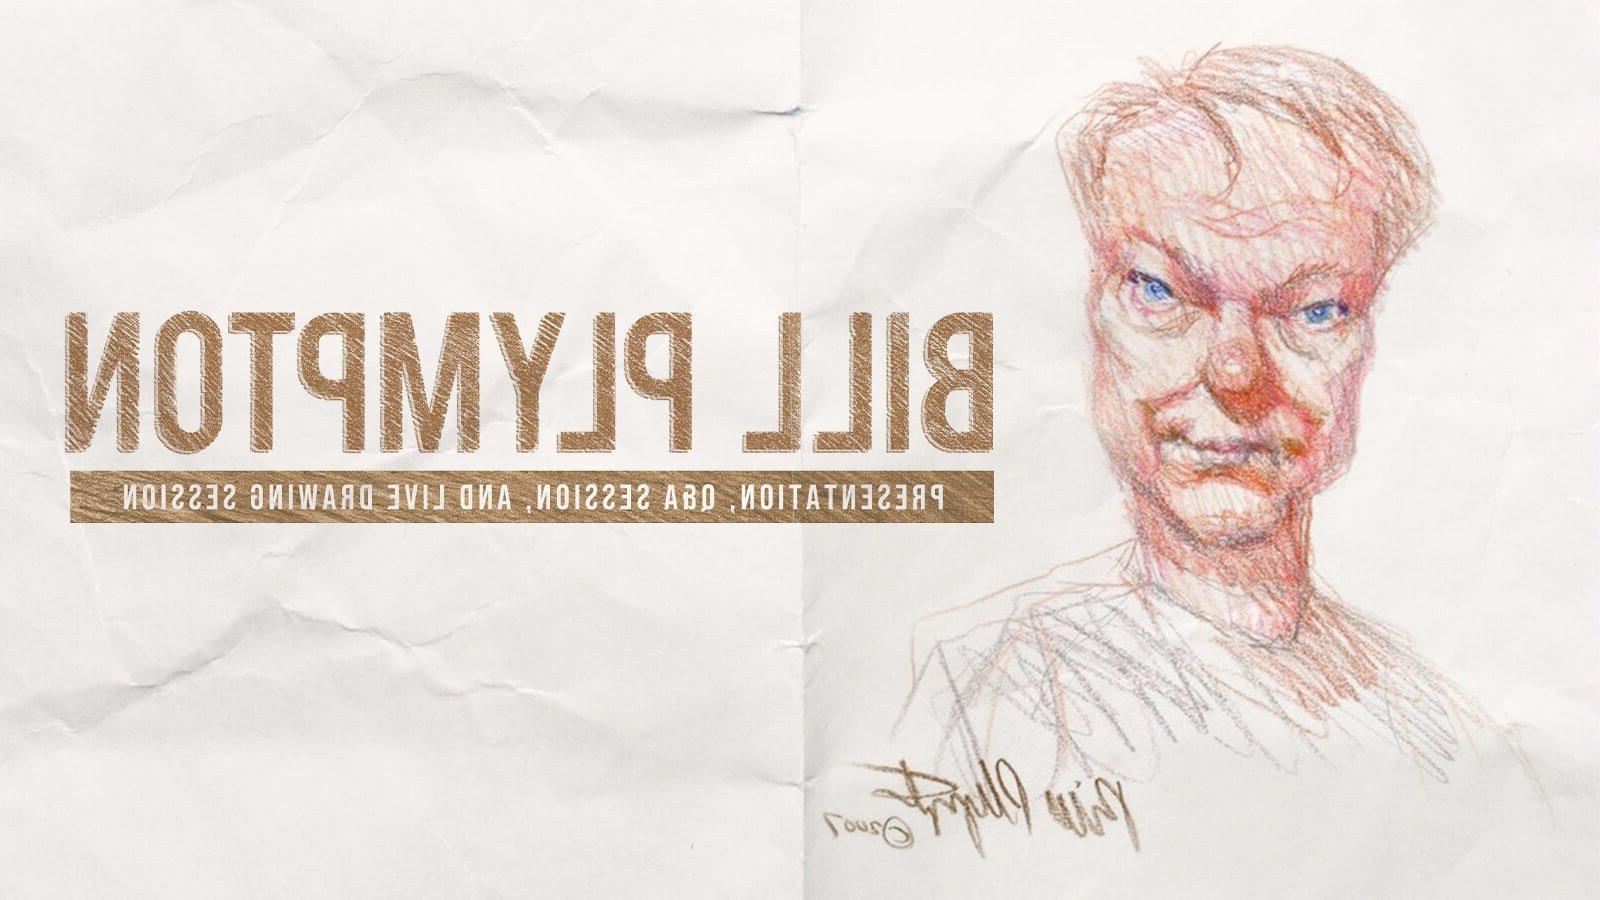 A sketch of American Animator Bill Plympton, drawn and signed by Bill, sits next to the text, “Bill Plympton: Presentation, Q&A Session, and Live Drawing Session.